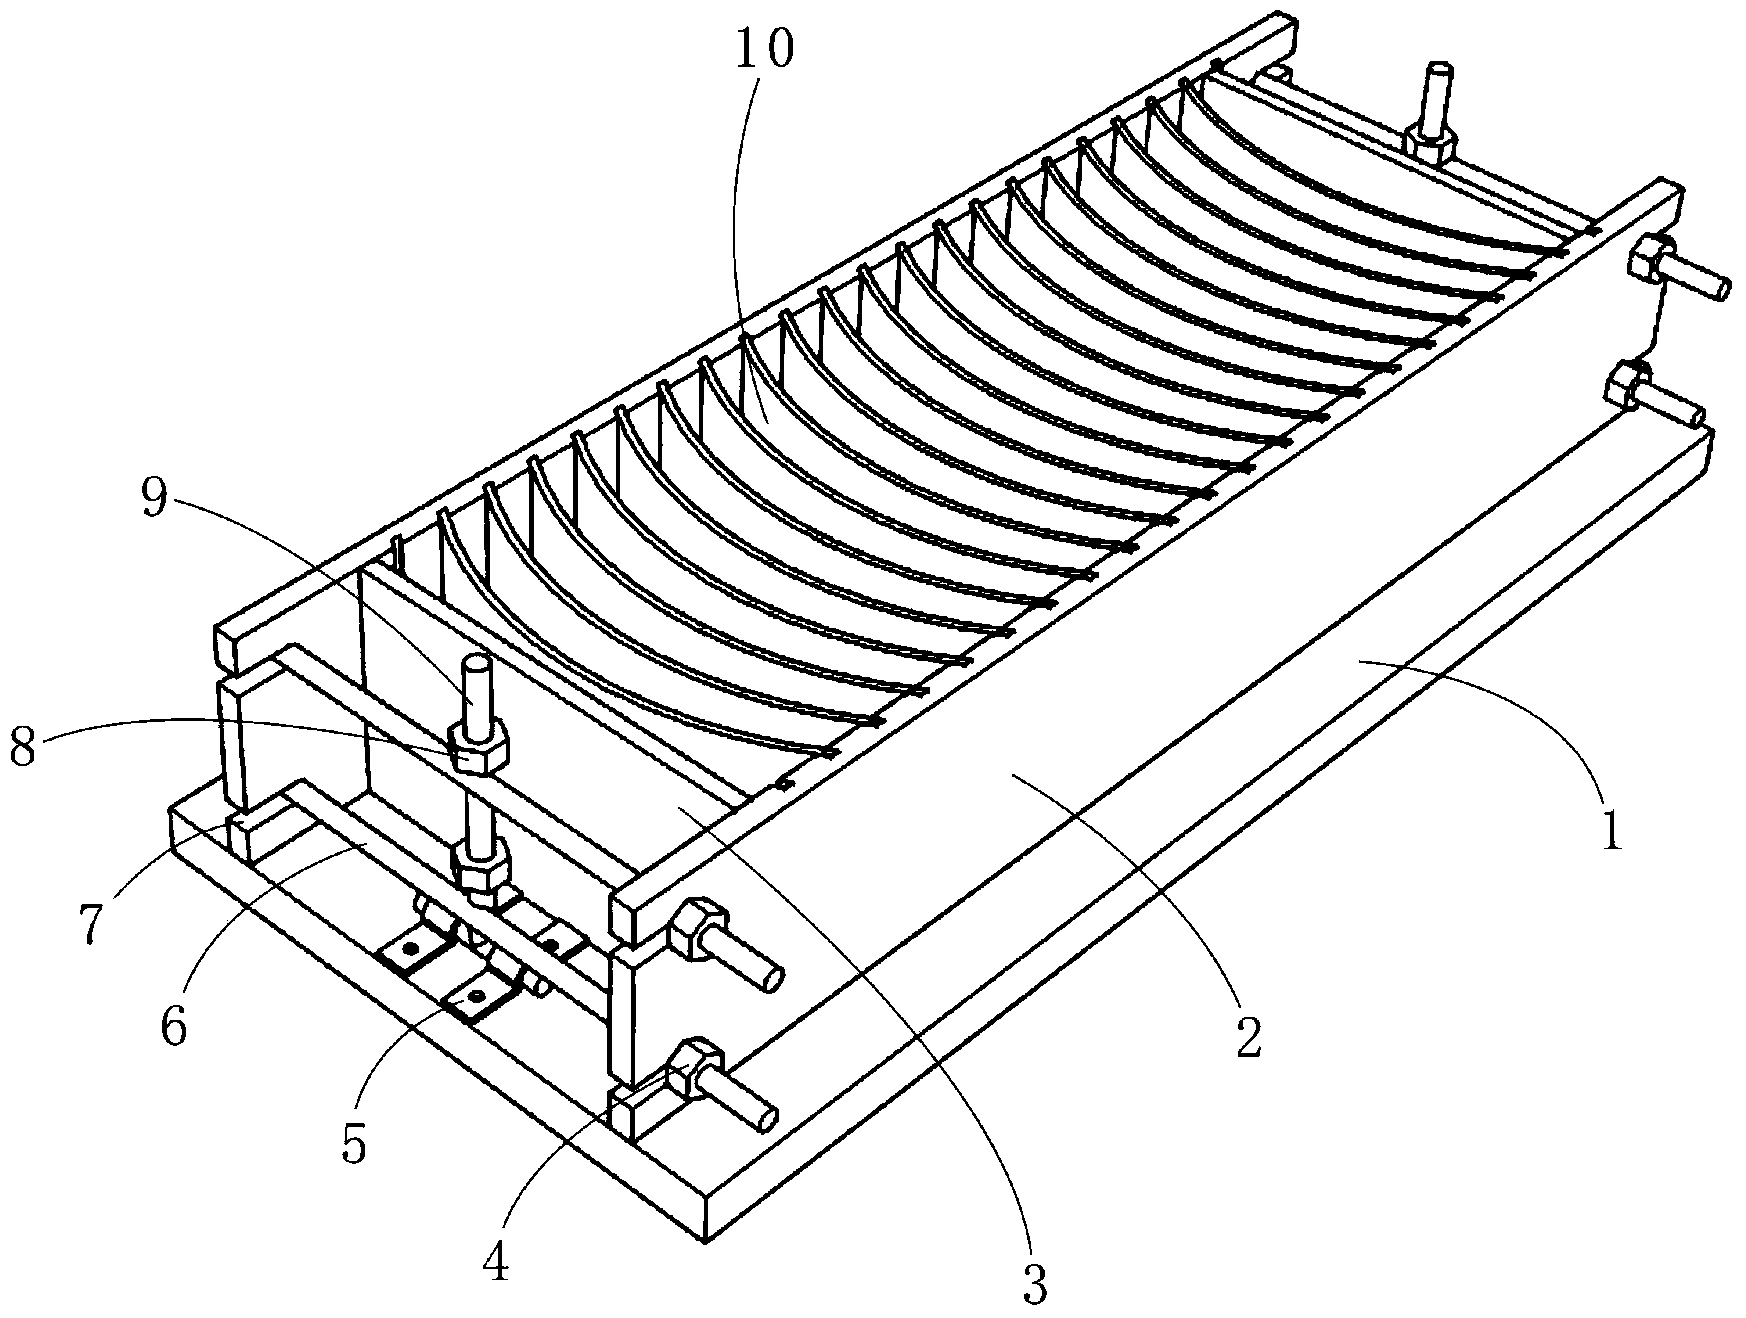 Chinese-style tile production die